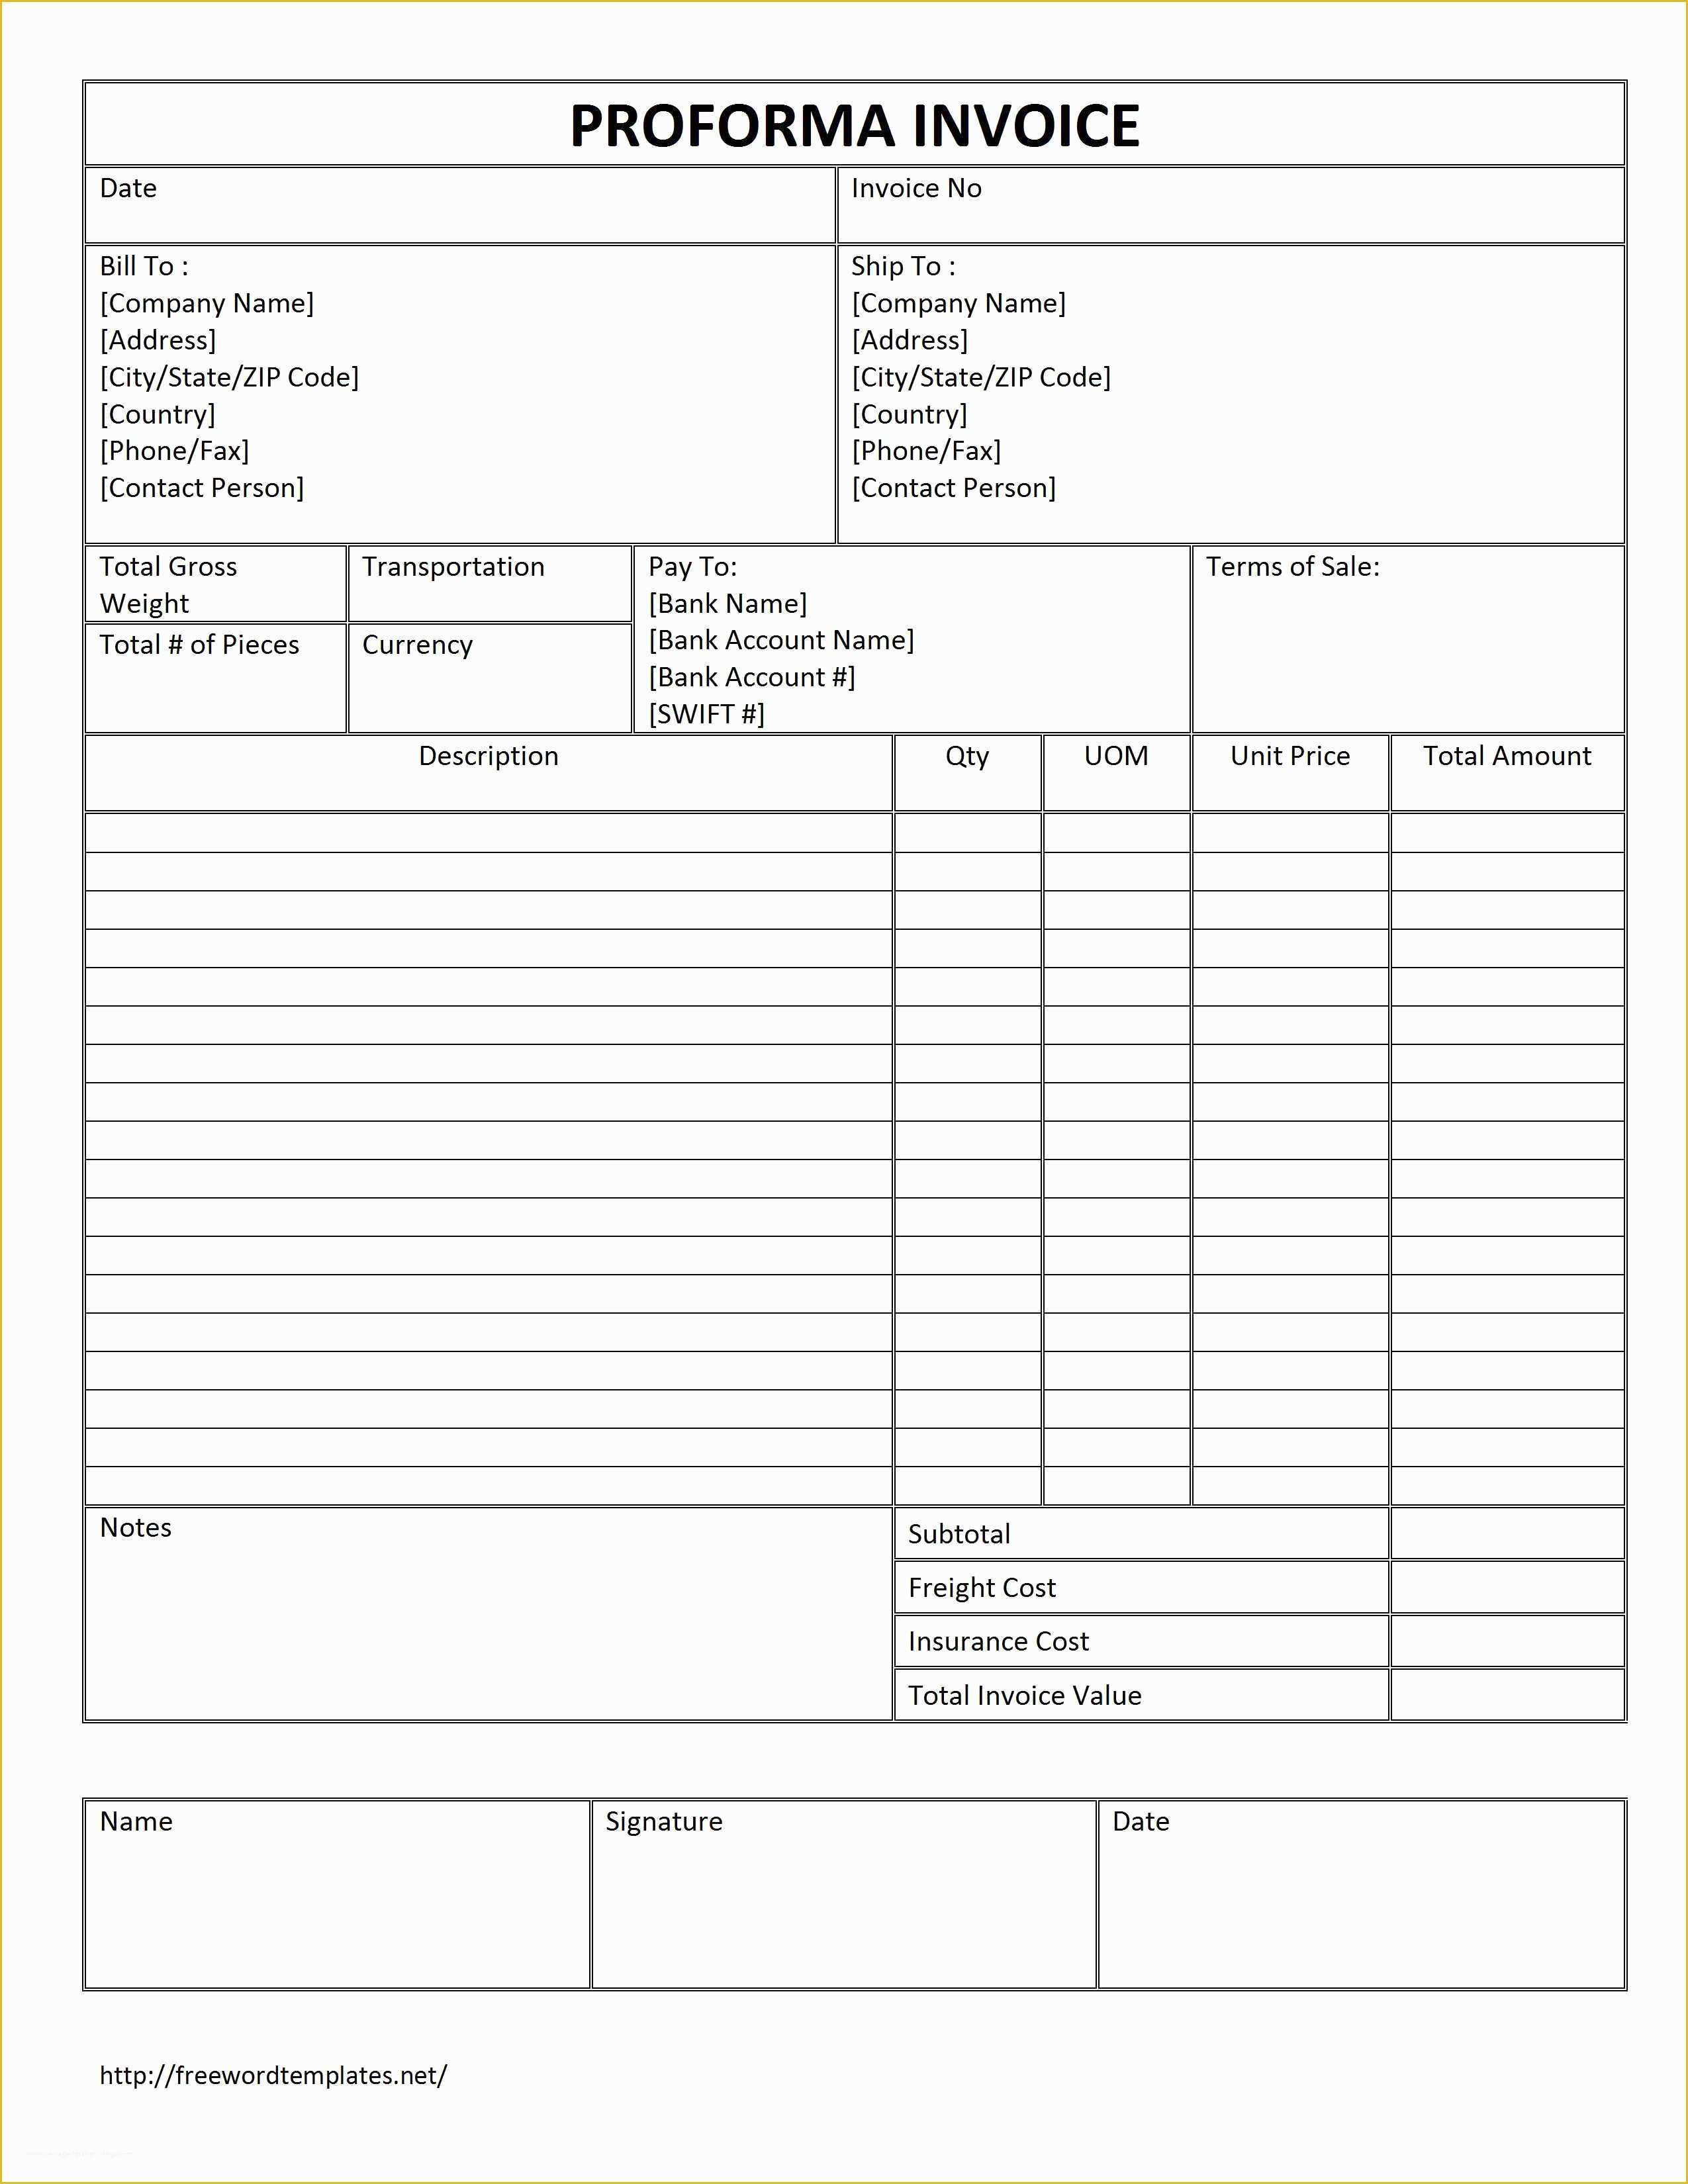 Free Invoice Template Word Of Proforma Invoice Template Word